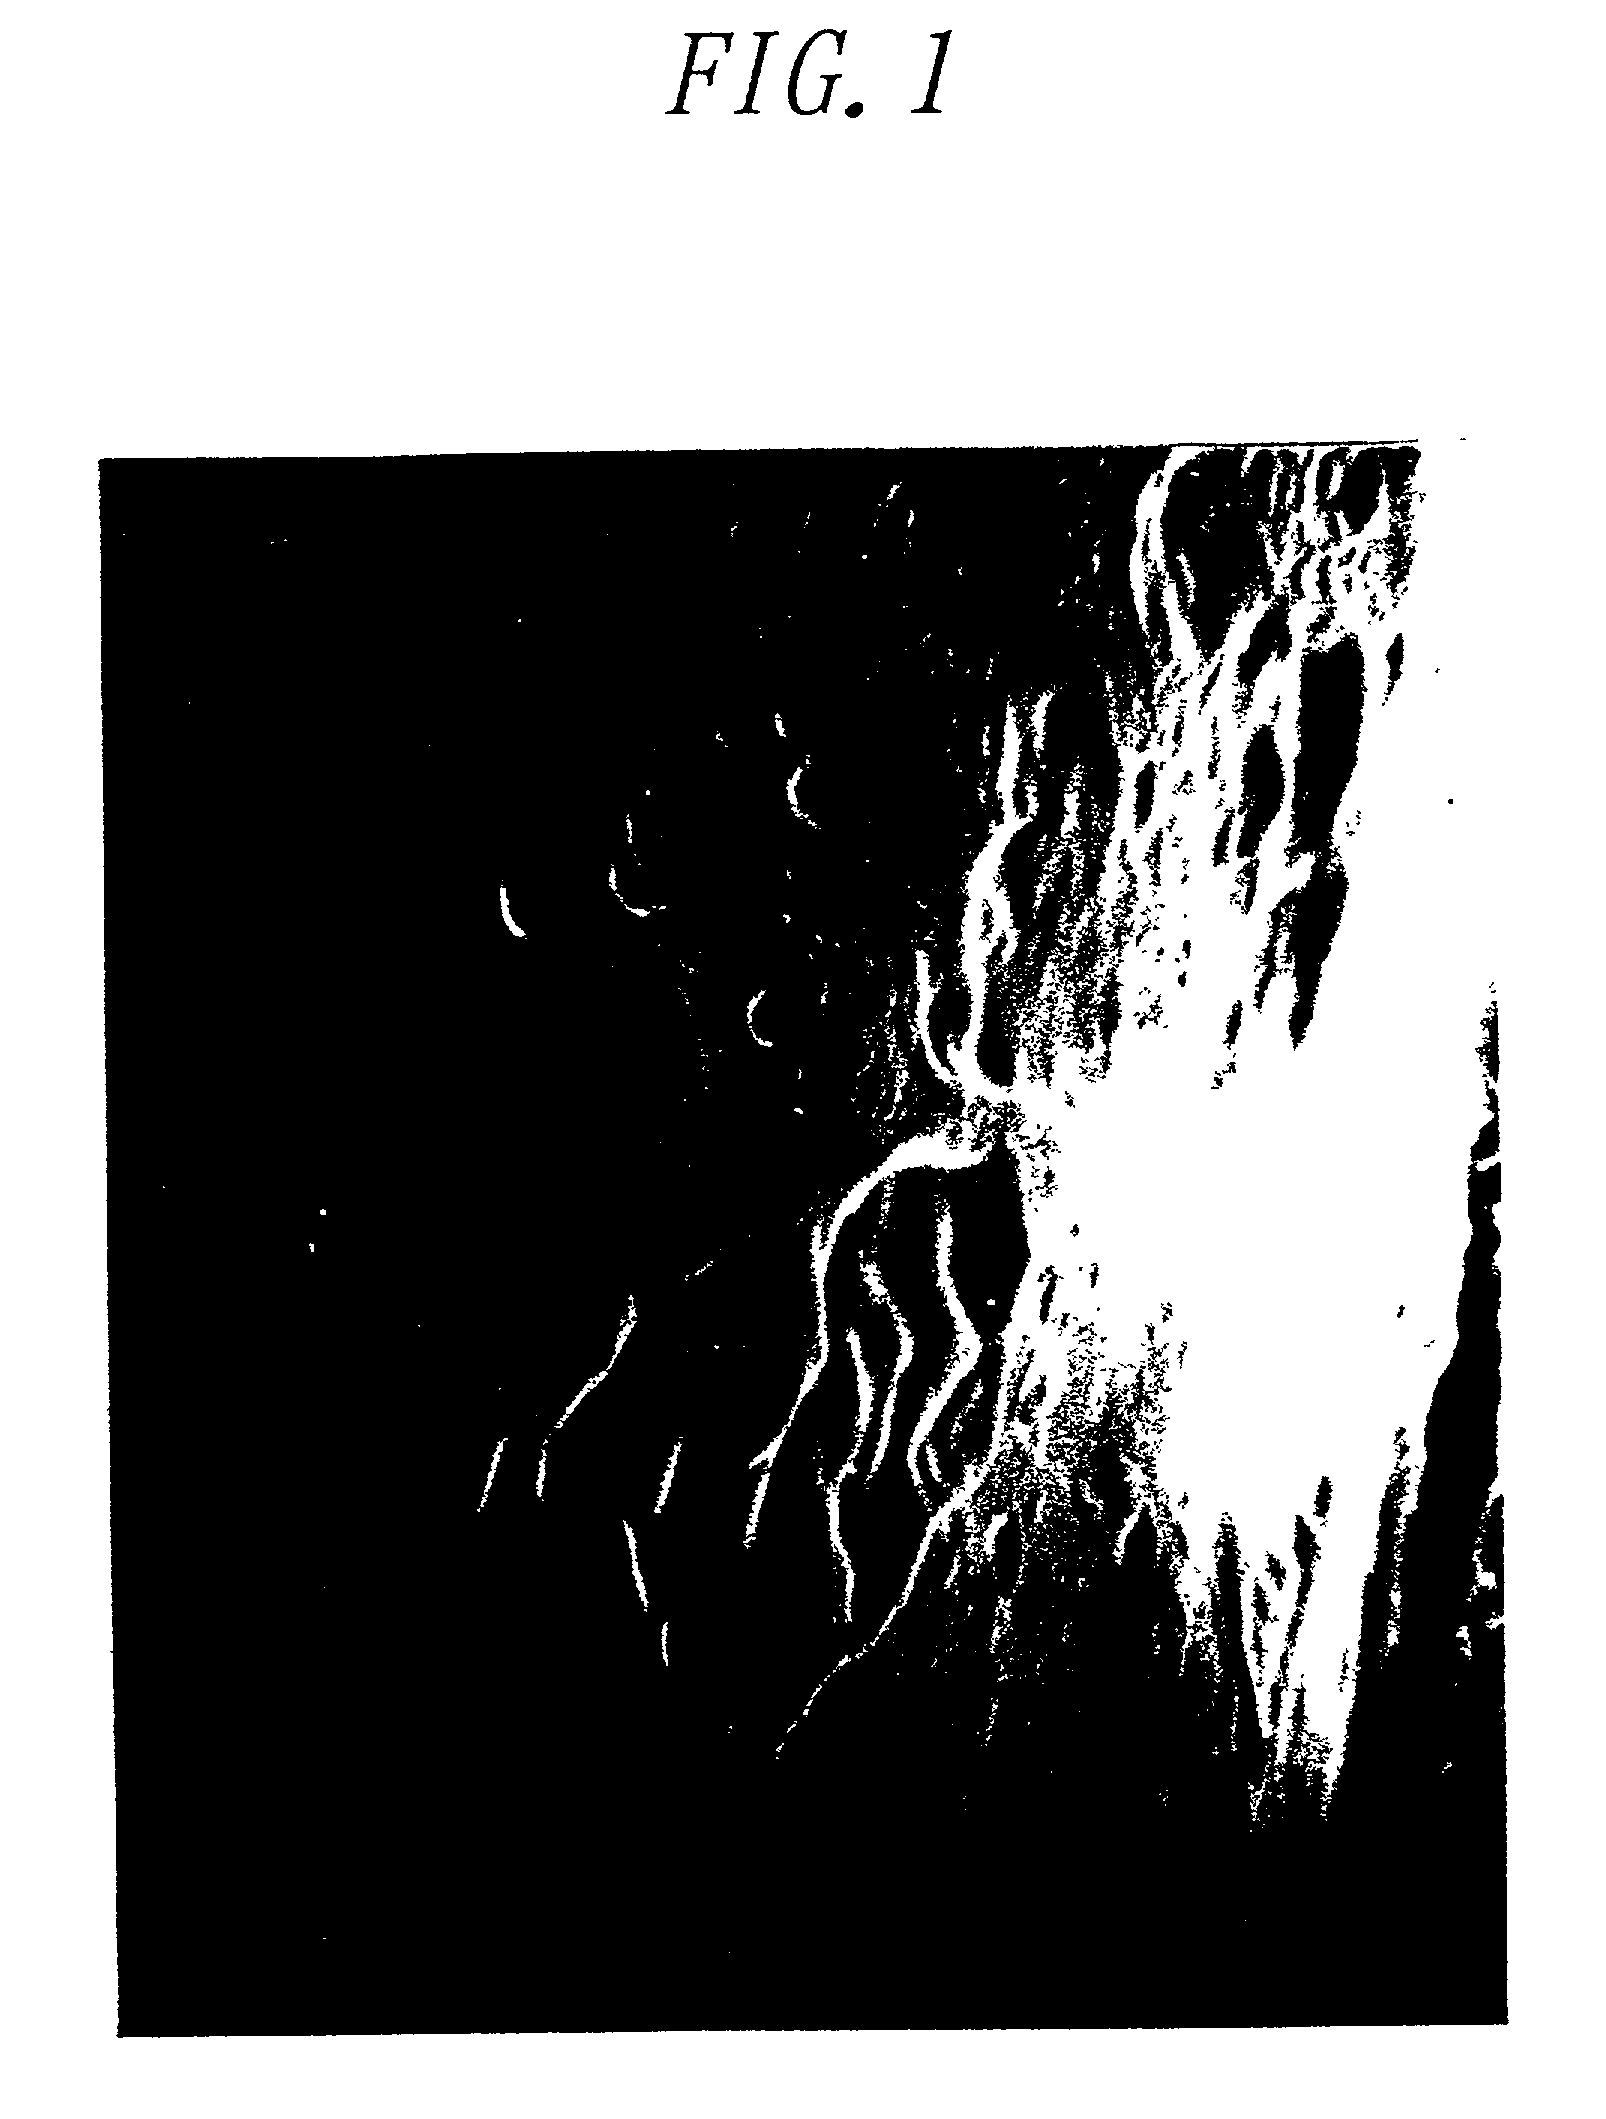 Method for decomposing polyesters containing aromatic moieties, a denier reduction method of fiber, and microorganism having activity of decomposing the polyester